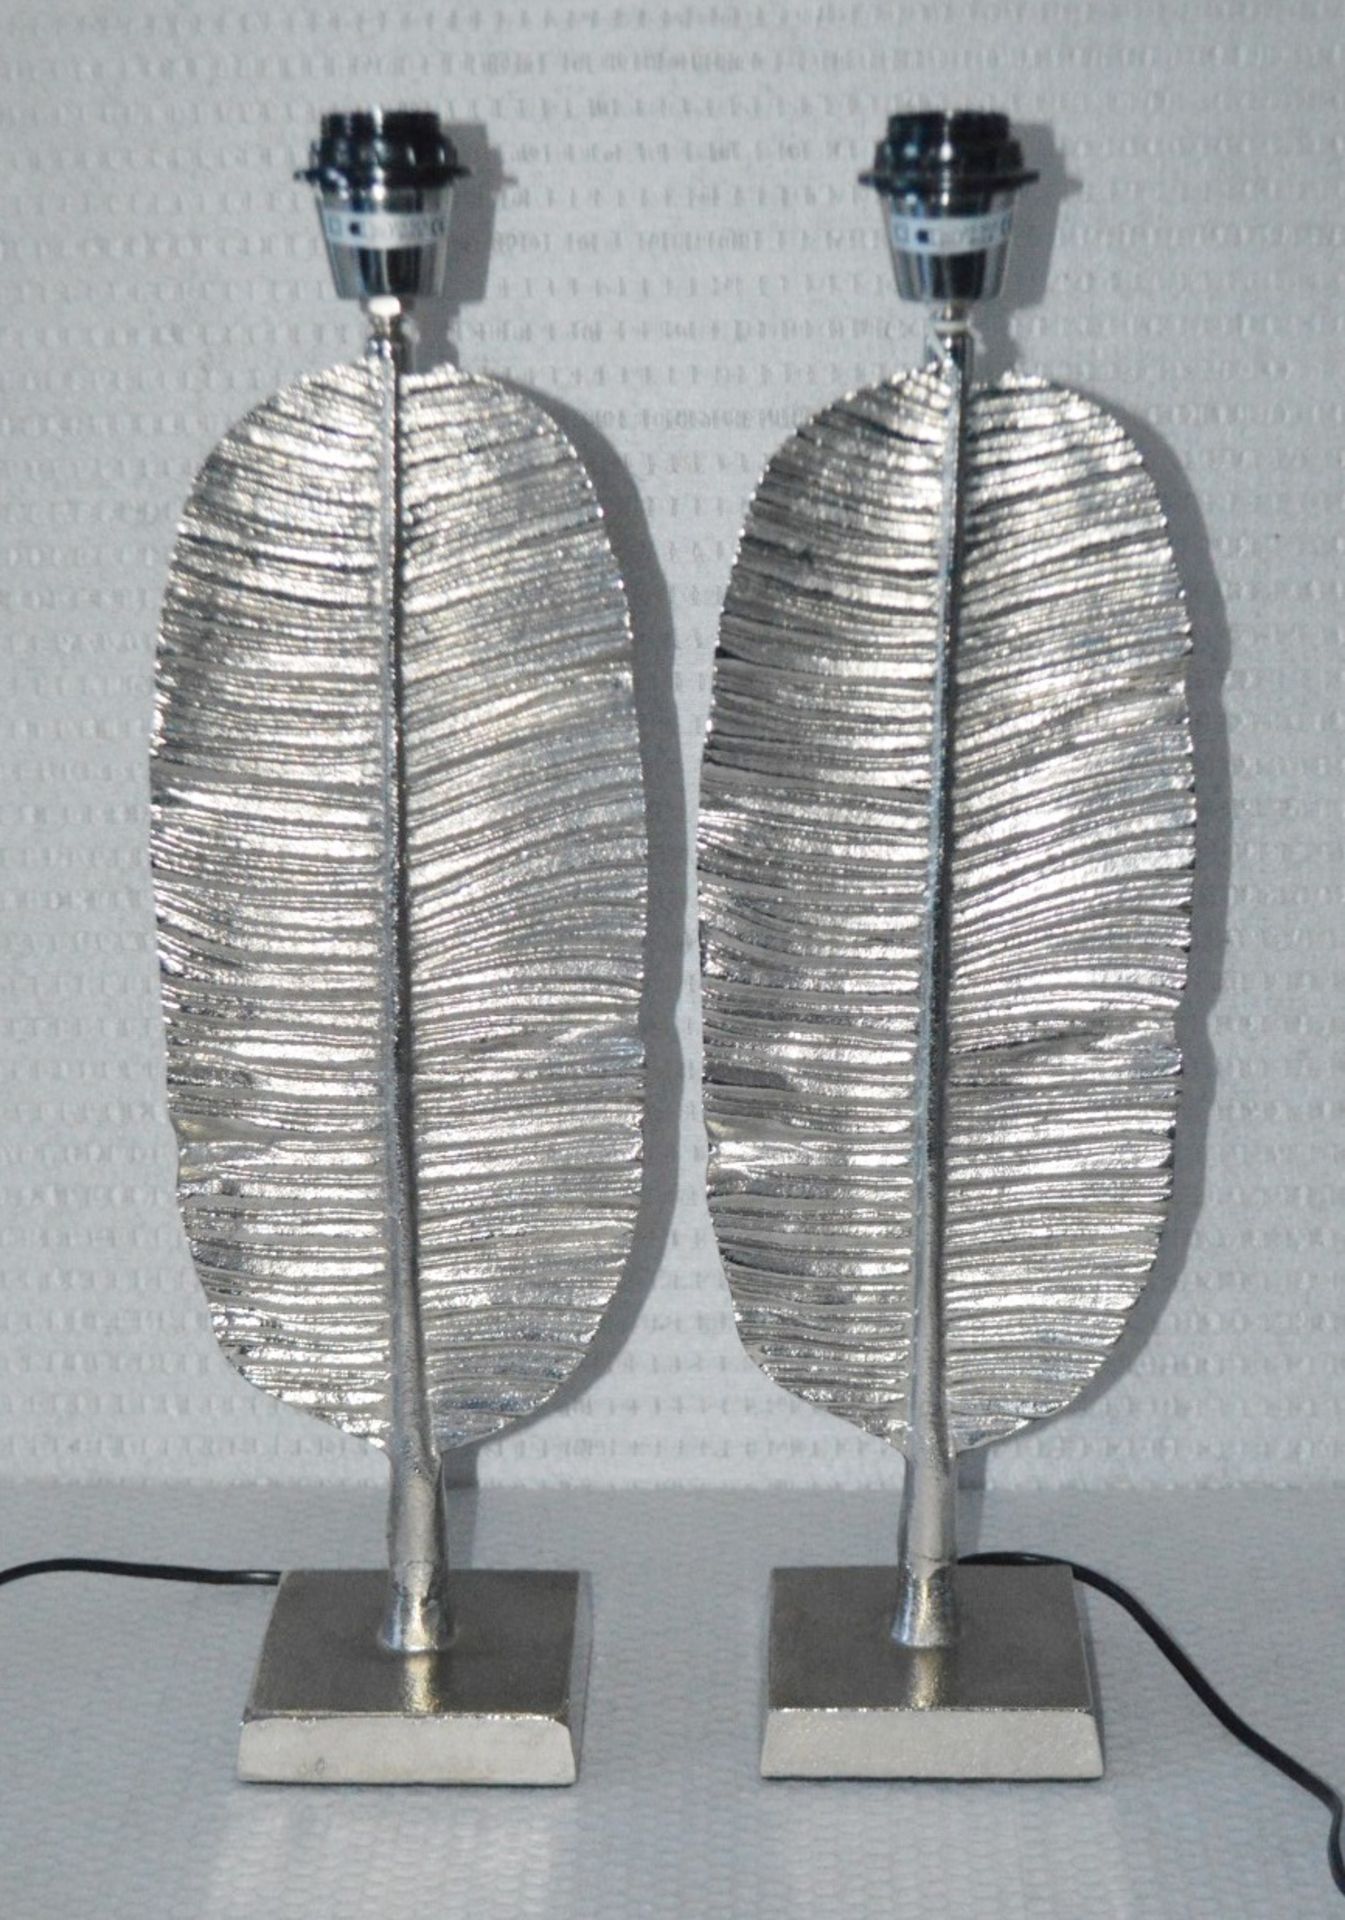 A Pair Of “Feather” Metal Bedside Lamps In A Silver Finish - From An Exclusive Property In Hale